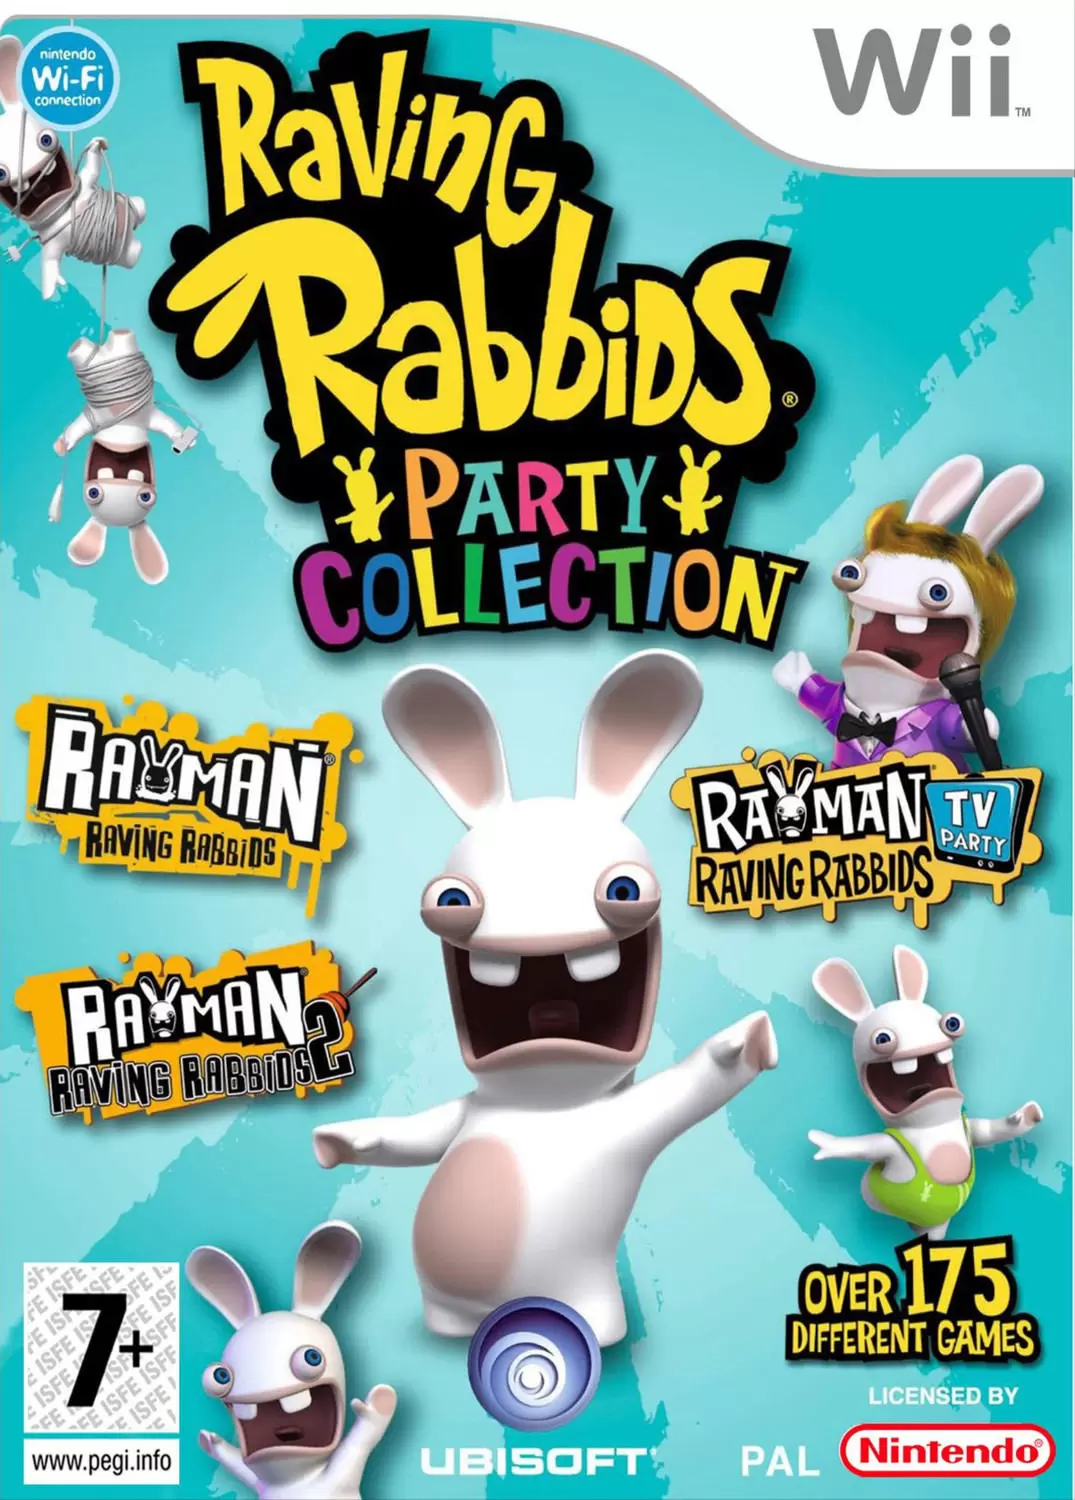 Nintendo Wii Games - Raving Rabbids - Party Collection